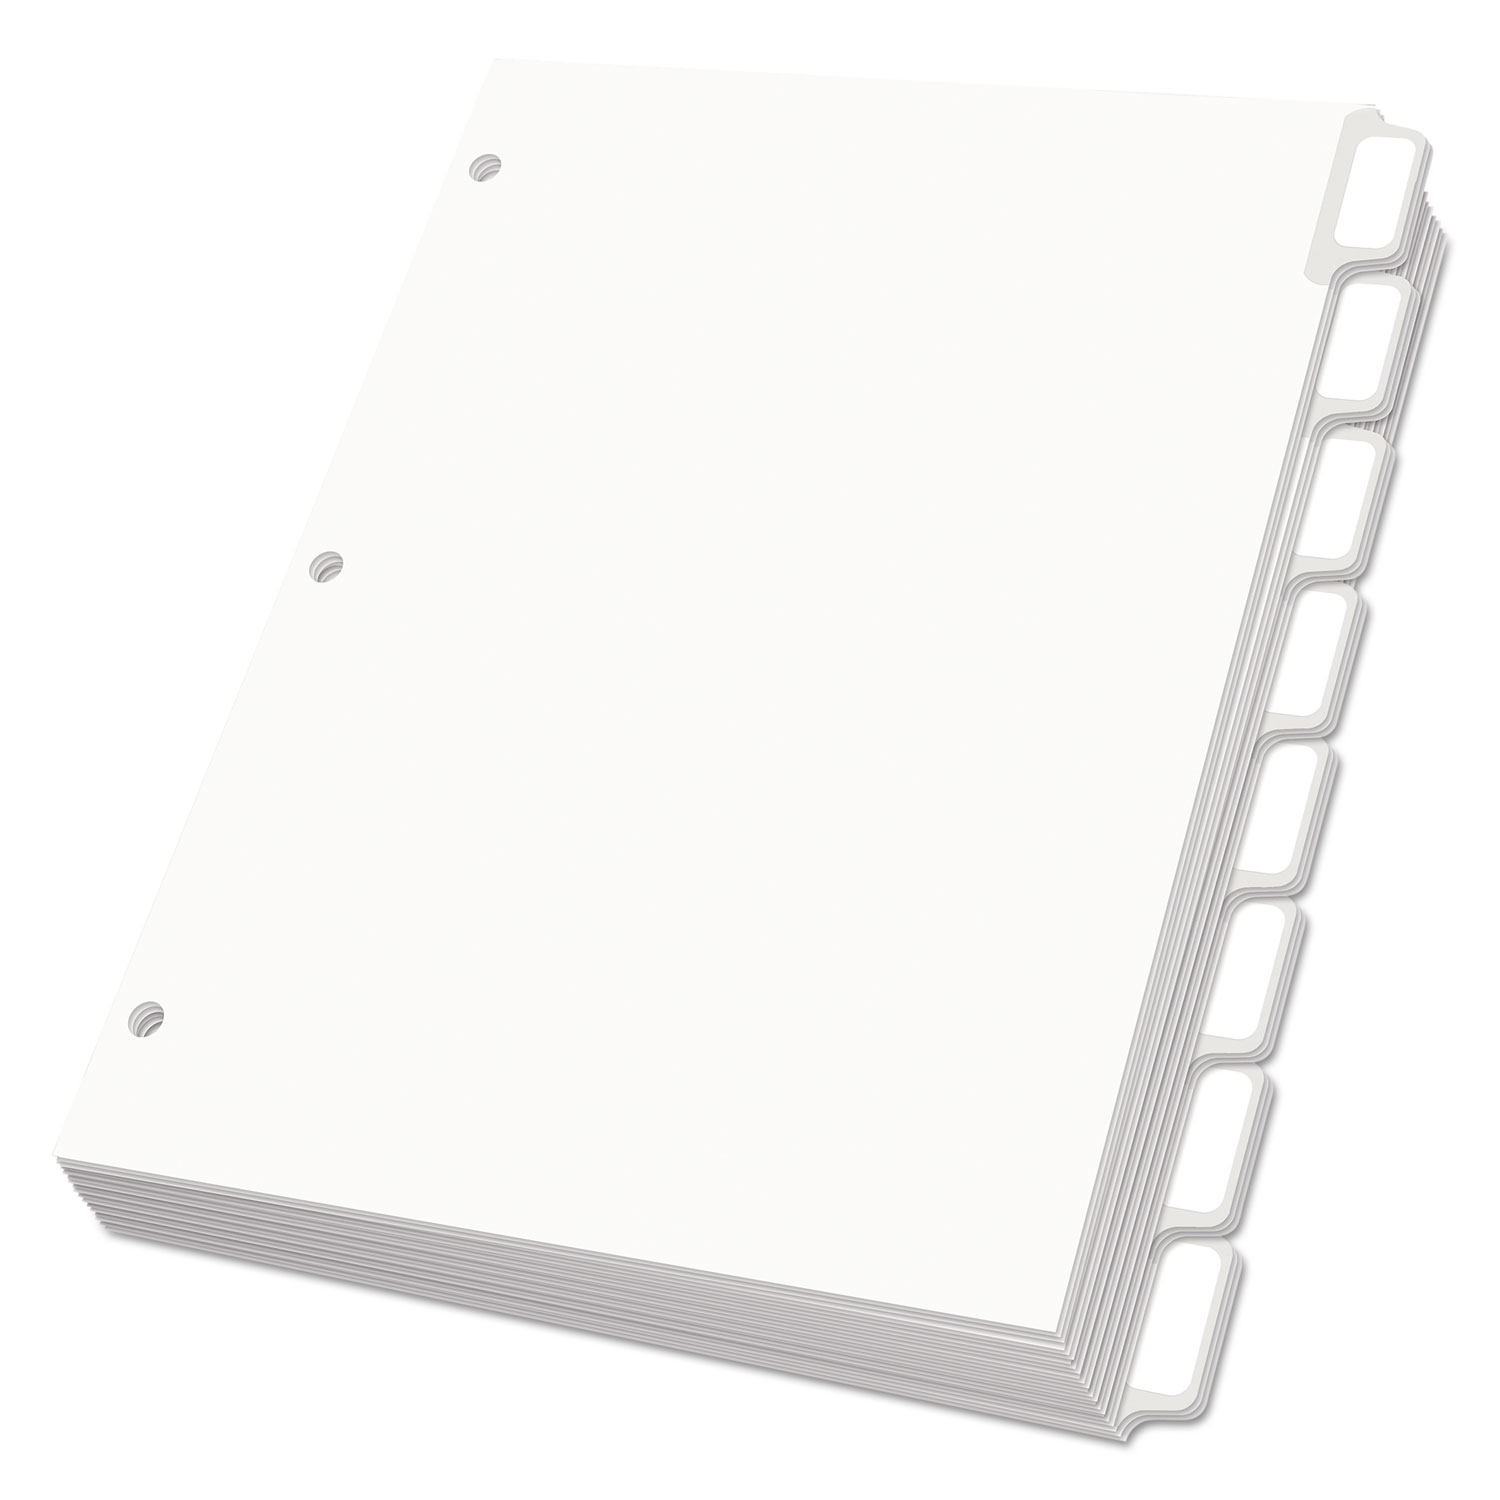  Oxford 11316 Custom Label Tab Dividers with Self-Adhesive Tab Labels, 8-Tab, 11 x 8.5, White, 25 Sets (OXF11316) 